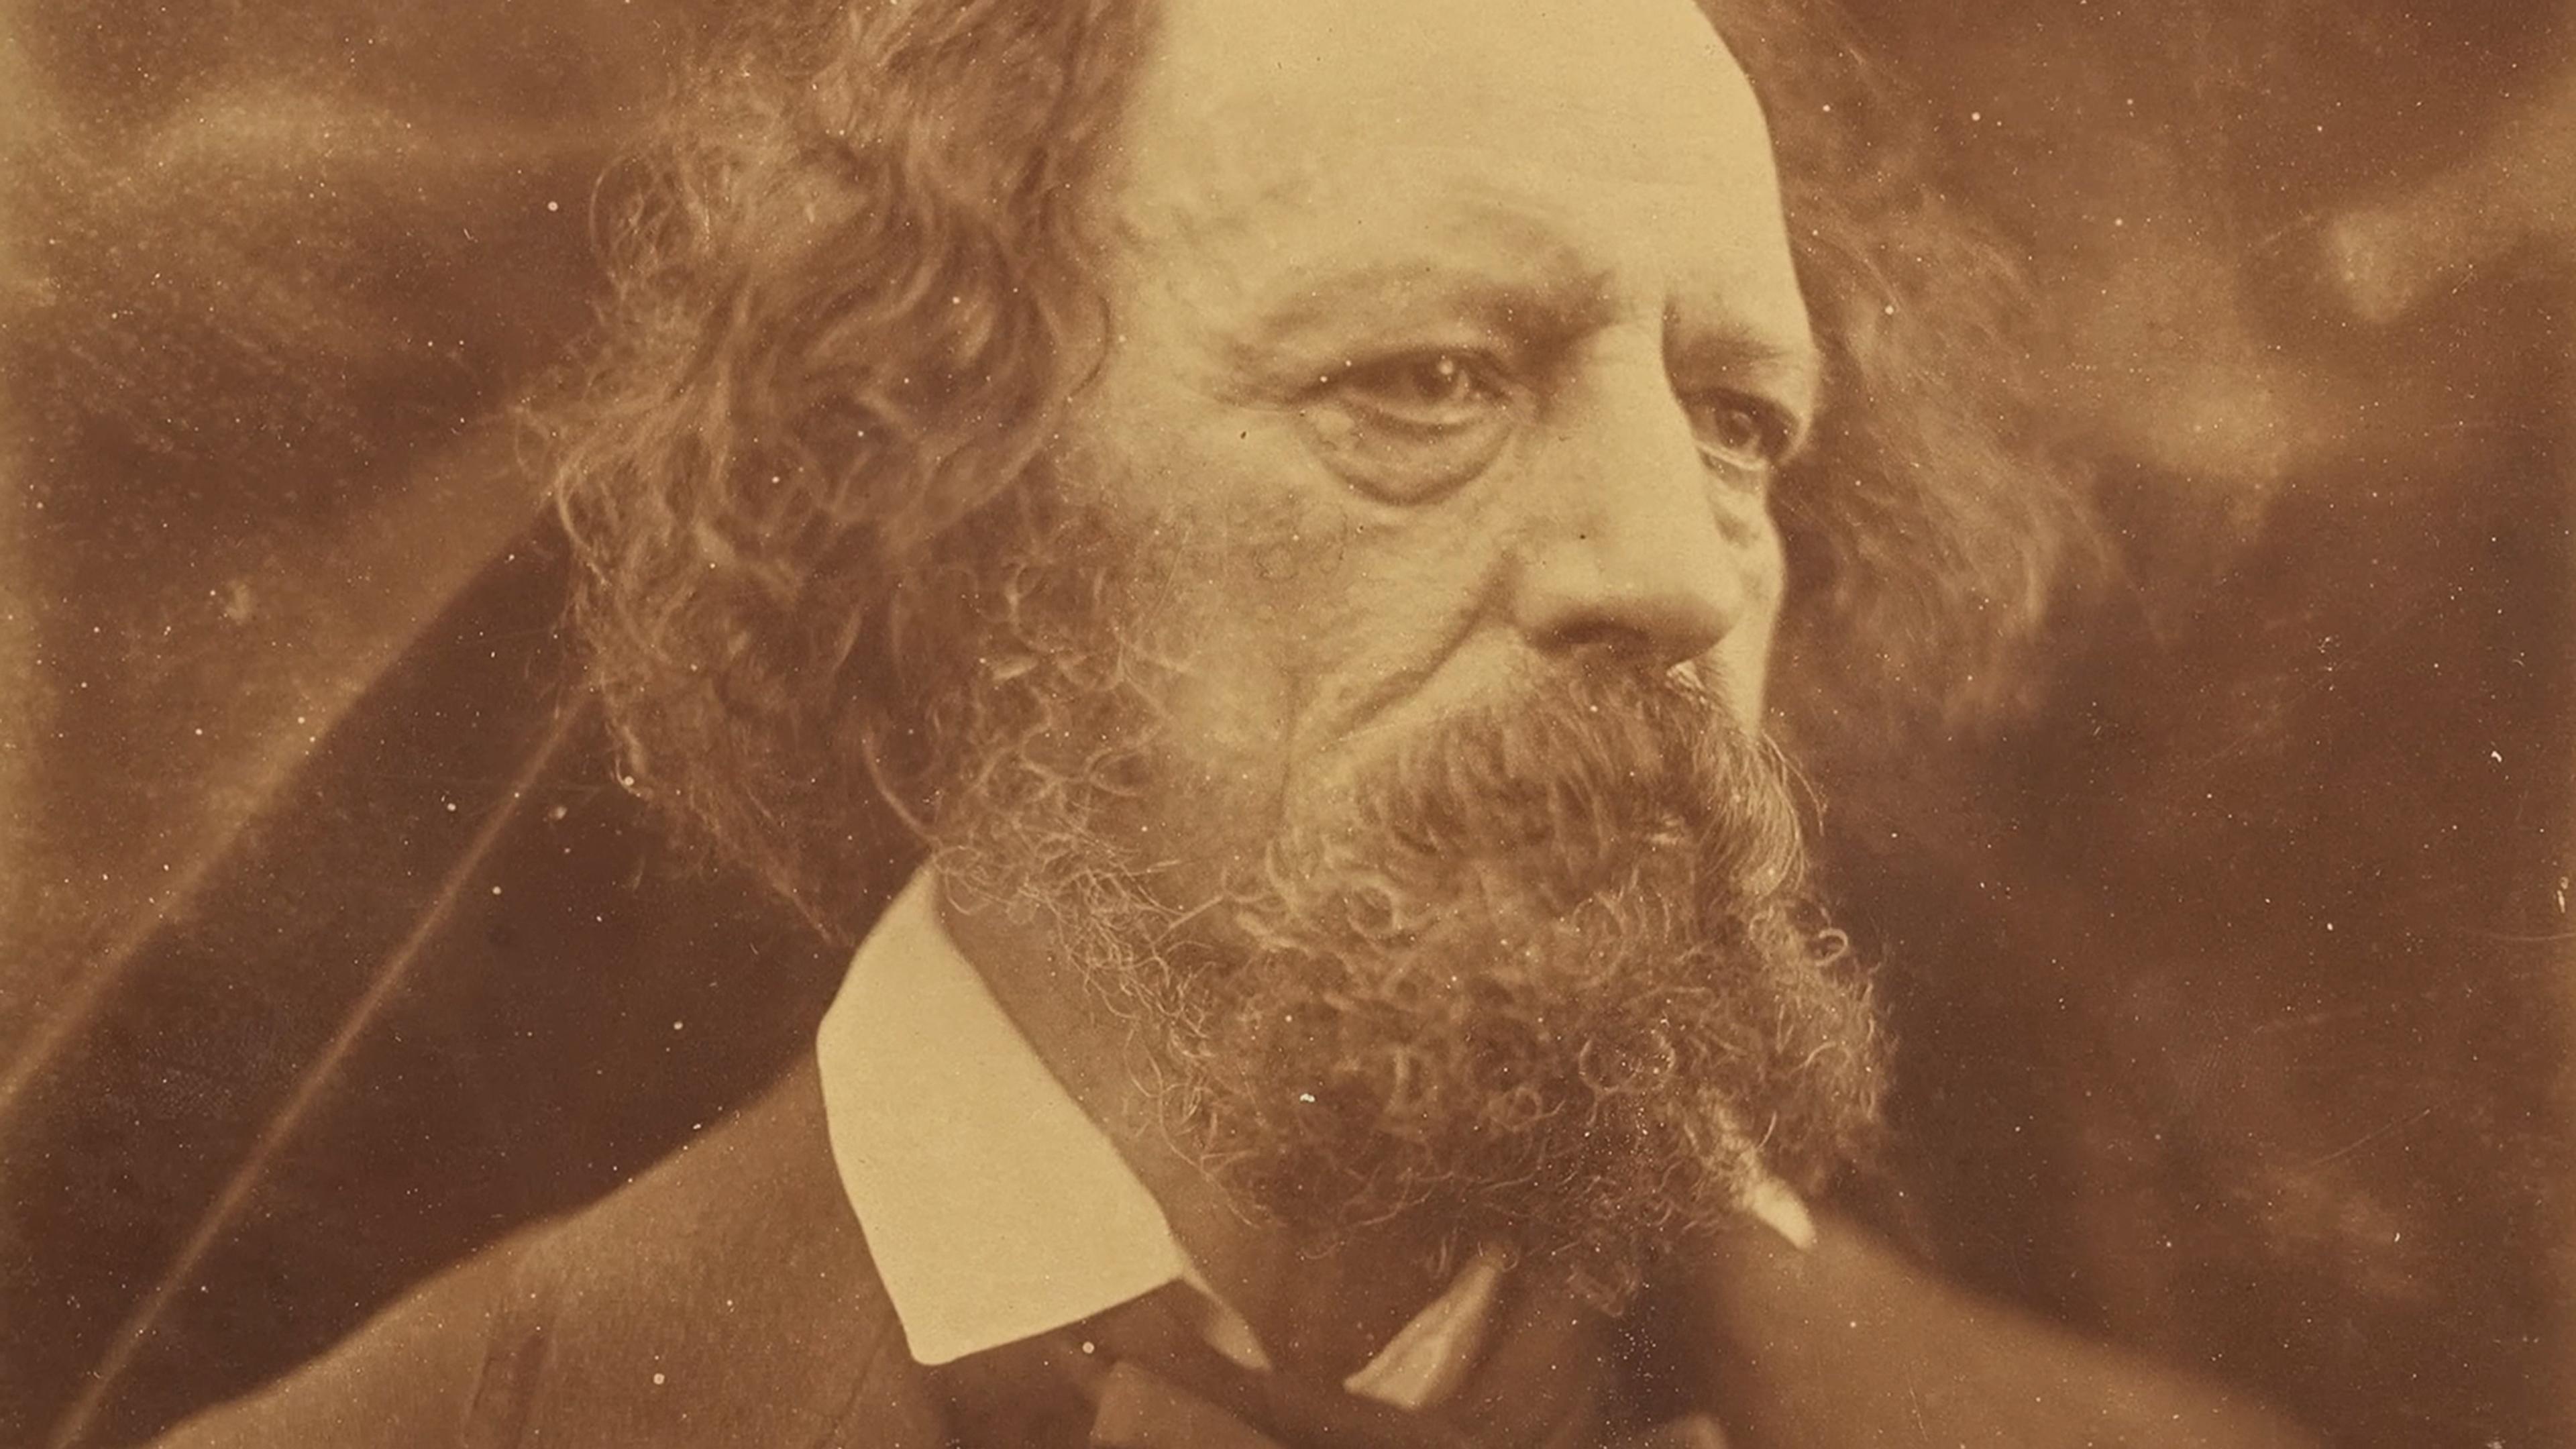 Sepia photograph of the poet with long curly hair and a full beard and moustache. He wears a white shirt and dark suit, and has a thoughtful expression.